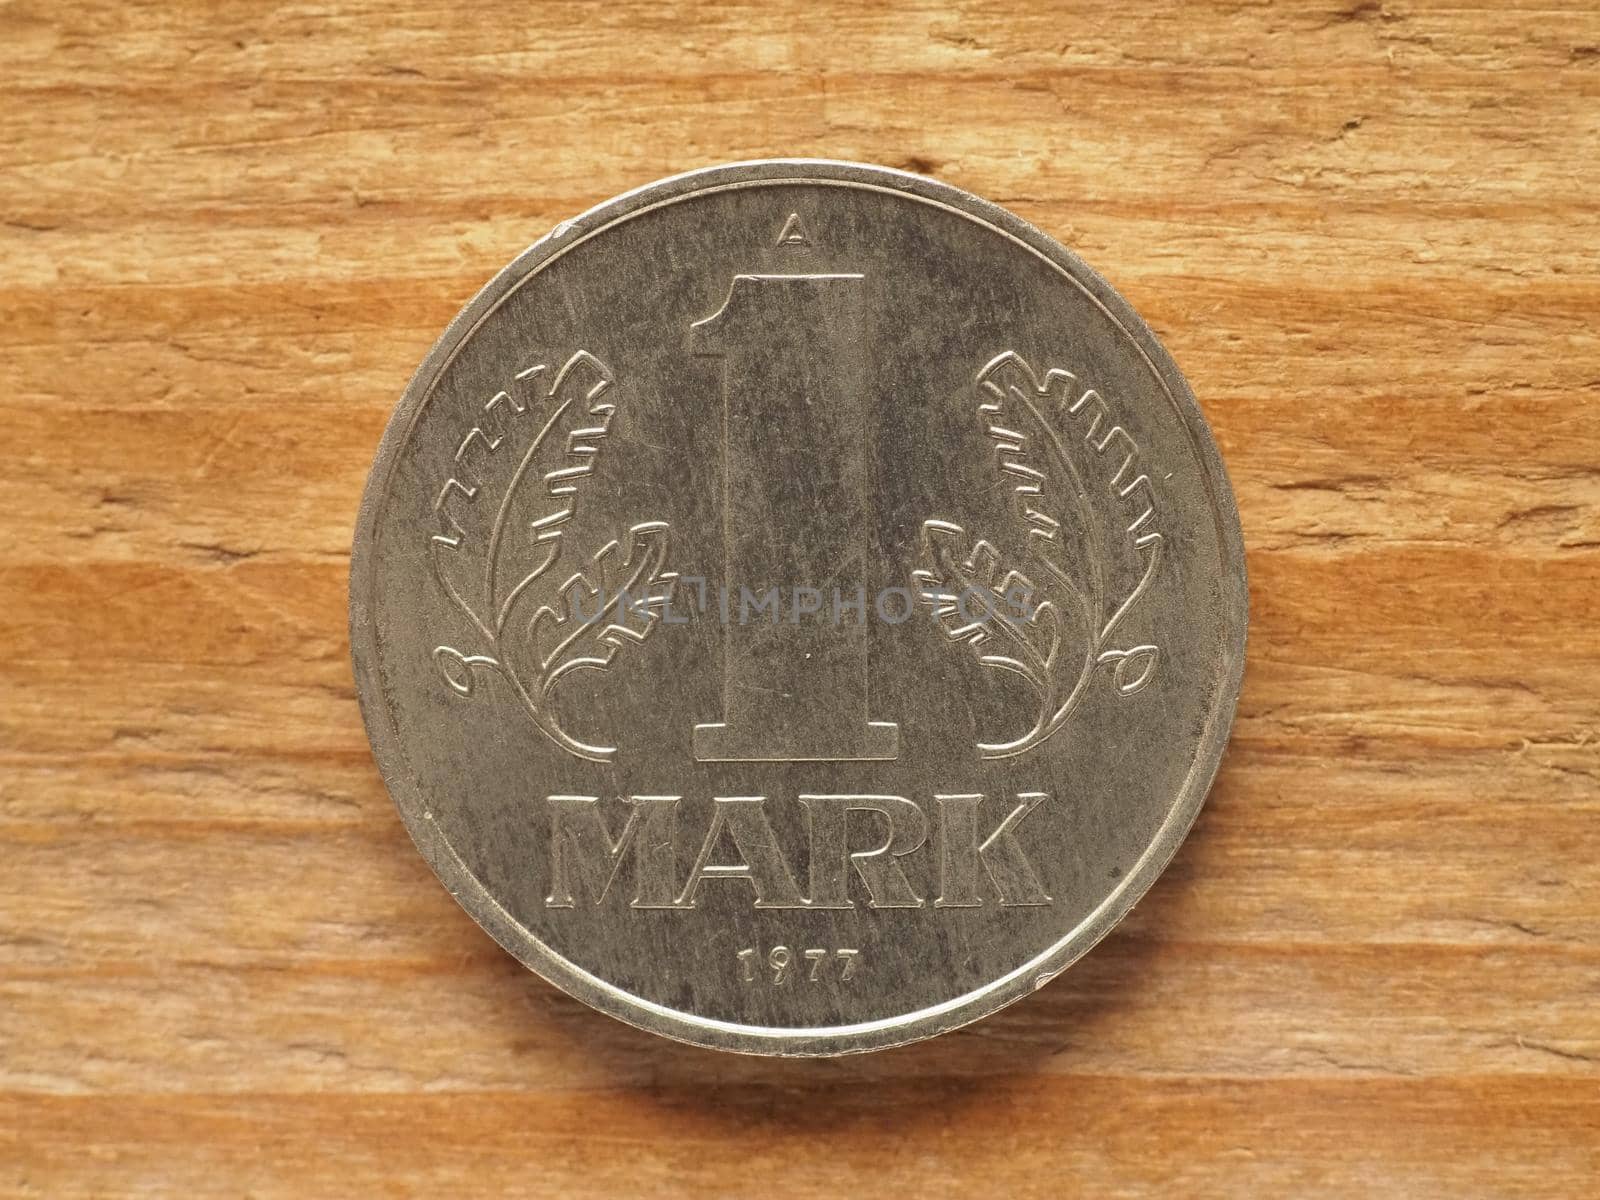 currency of East Germany, 1 mark coin reverse by claudiodivizia